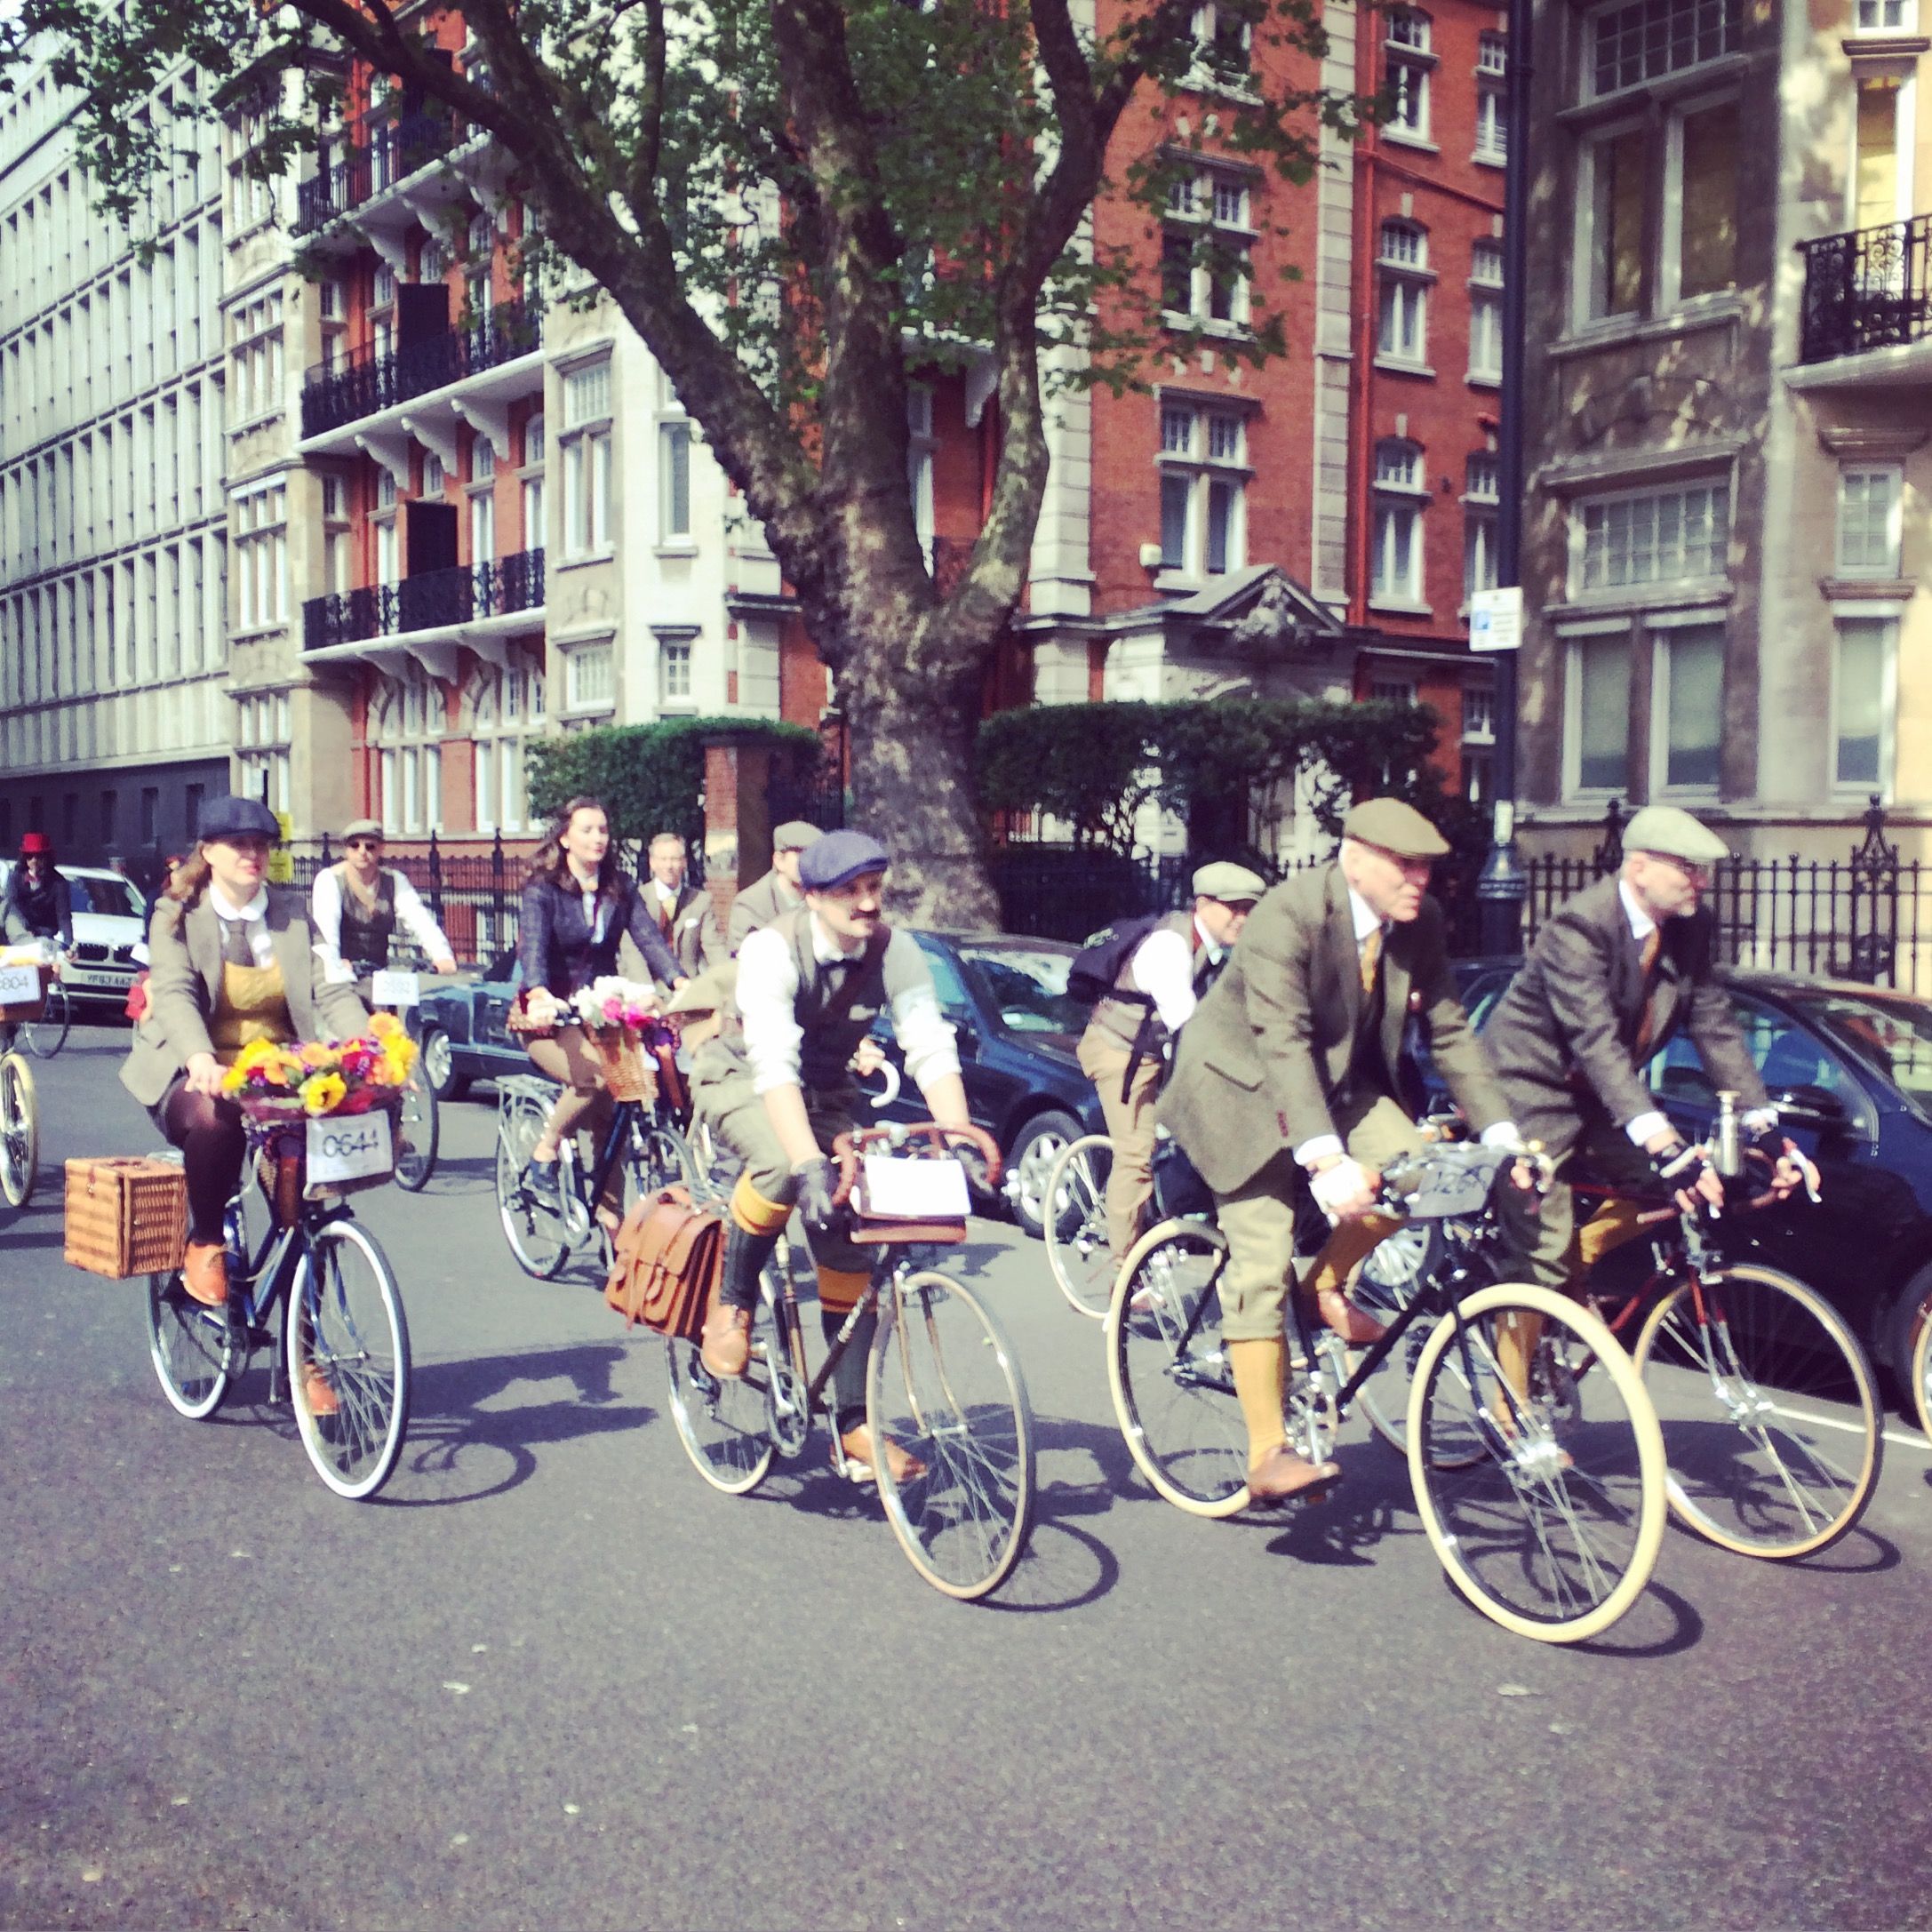 The Tweed Ride: Cycling, Vintage Fashion & Hats!